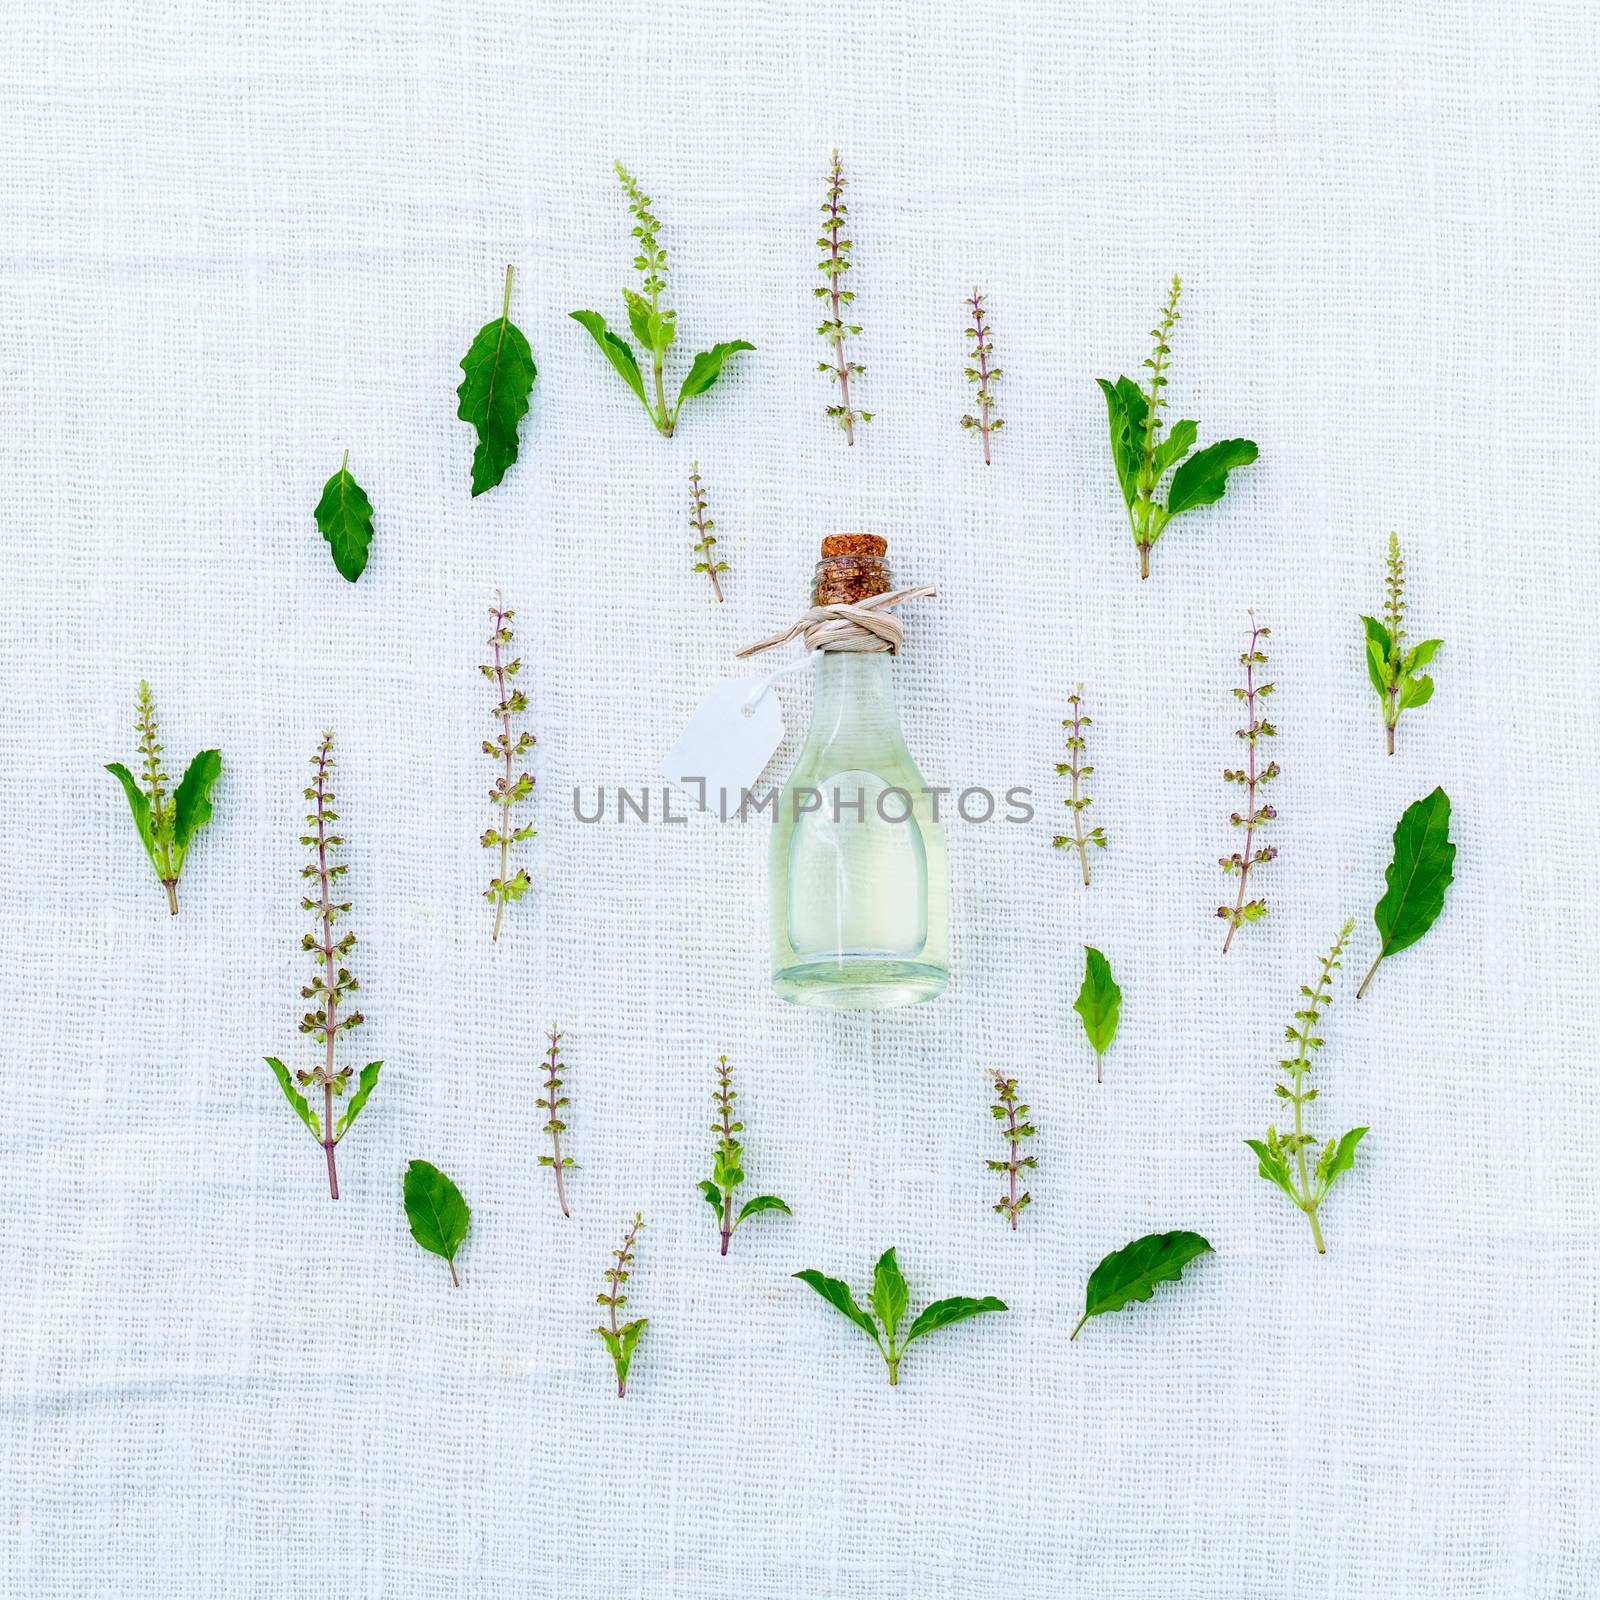 The circle of fresh holy basil flower and holy basil leaves from by kerdkanno